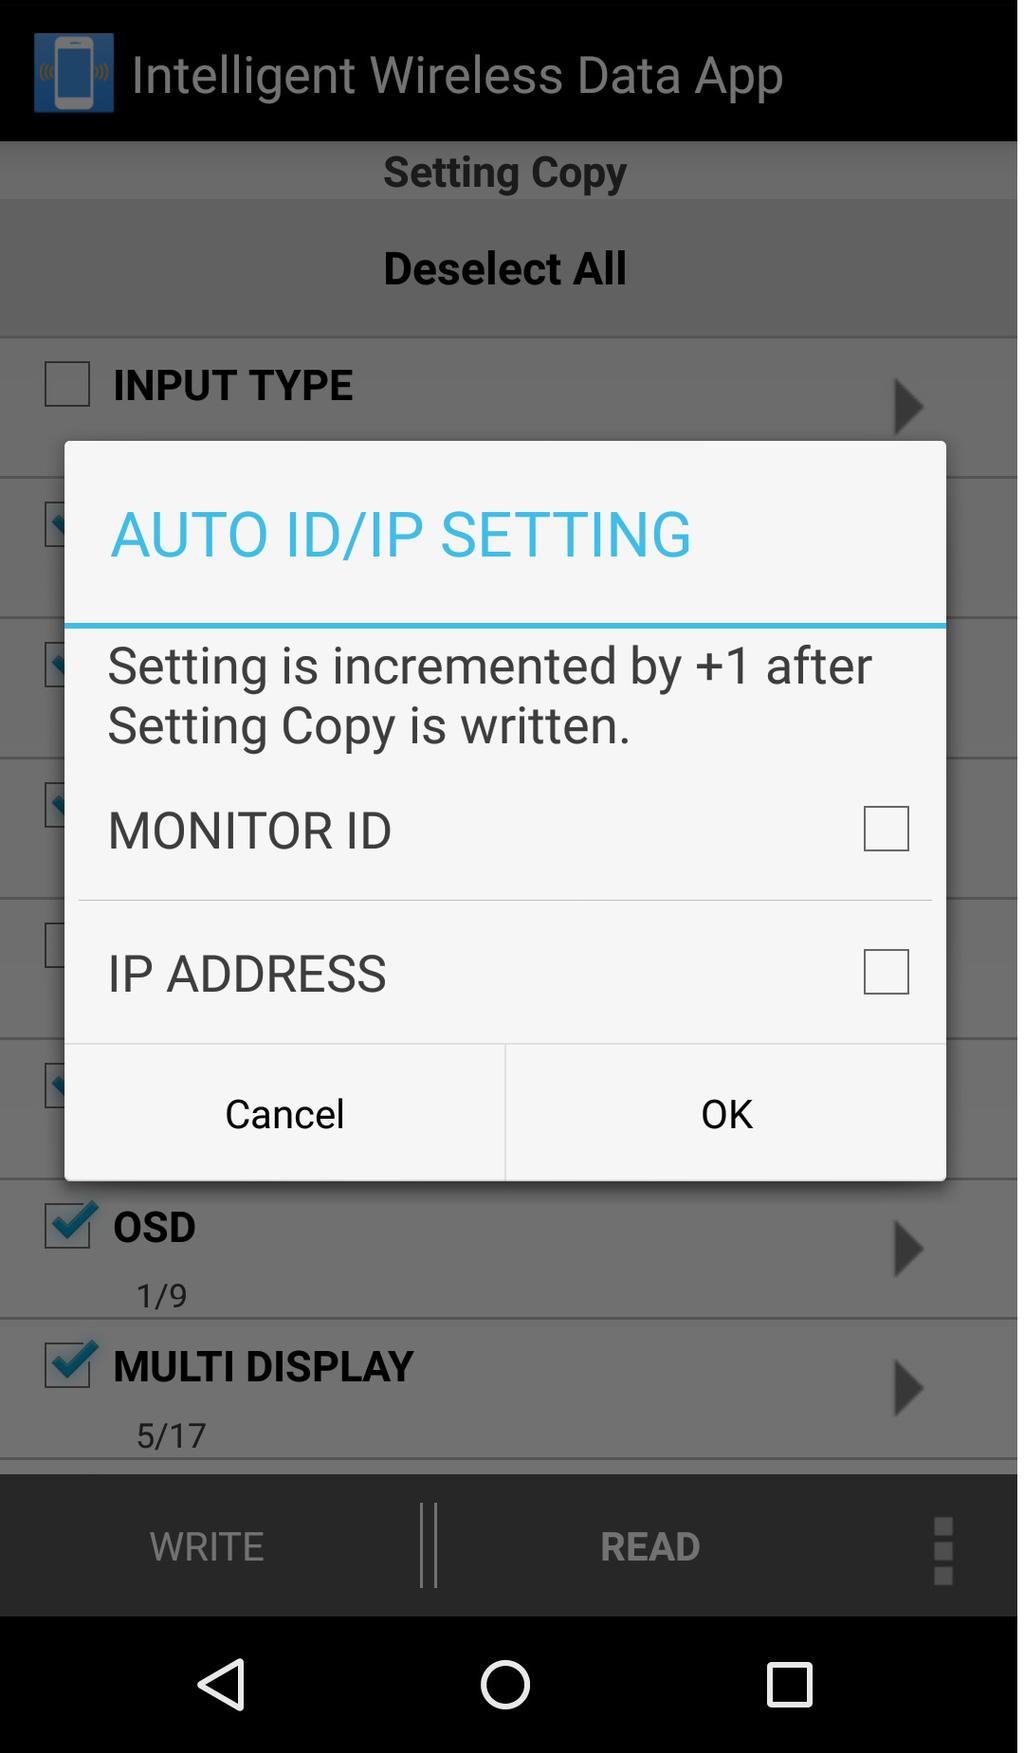 AUTO ID/IP SETTING screen After writing the Setting Copy, AUTO ID/IP SETTING adds 1 to the setting value for MULTI DISPLAY ID CONTROL MONITOR ID, or EXTERNAL CONTROL IP ADDRESS SETTING IP ADDRESS.